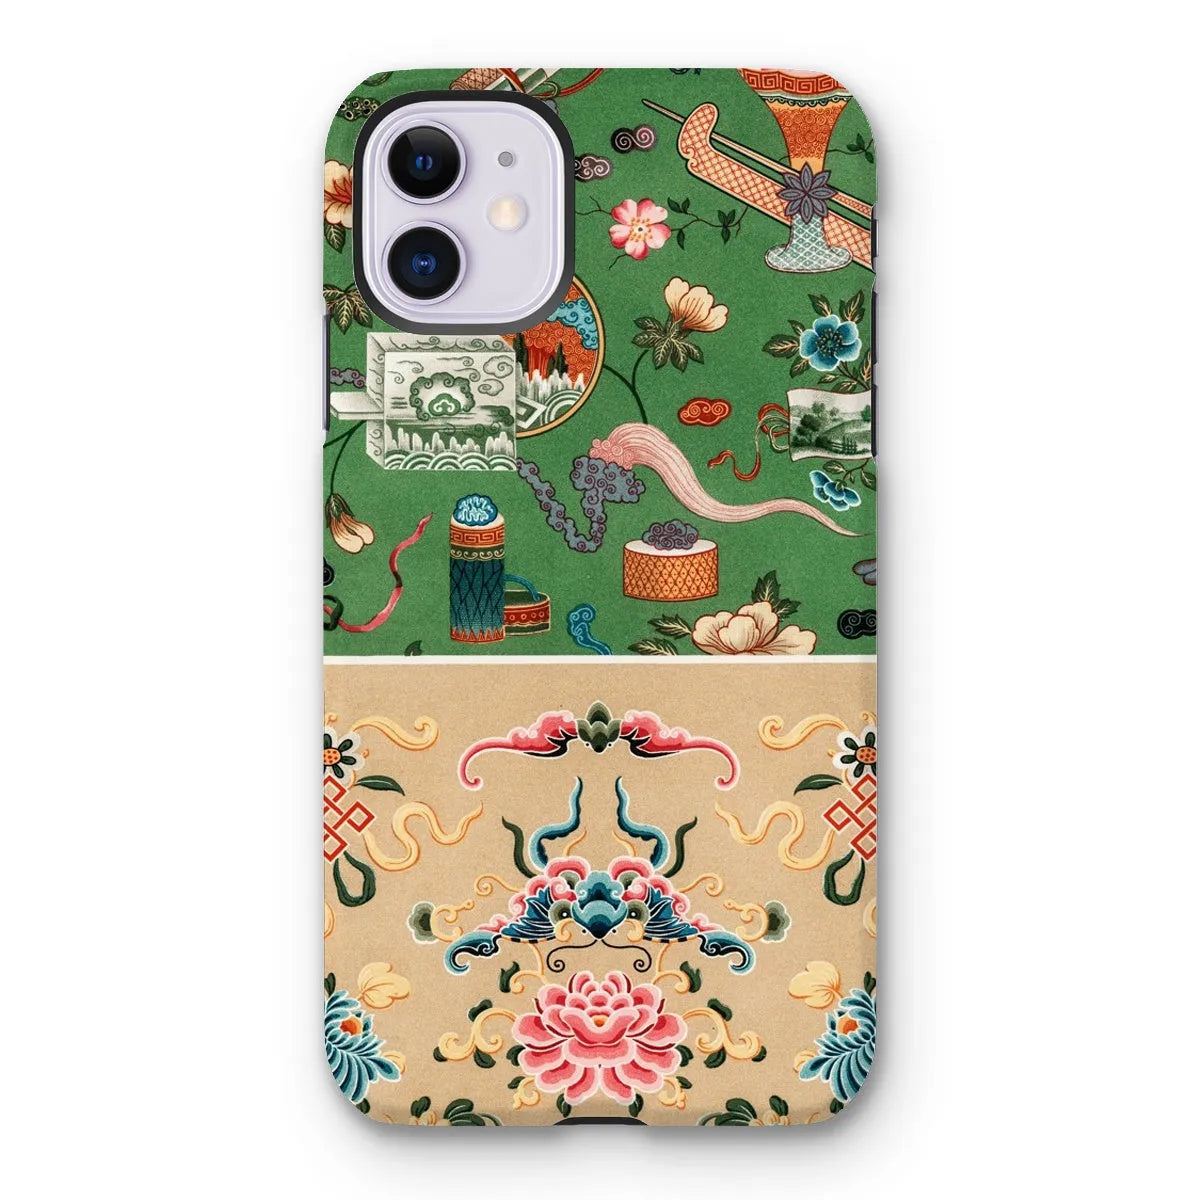 This Chinese Pattern By Auguste Racinet Tough Phone Case - Iphone 11 / Matte - Mobile Phone Cases - Aesthetic Art